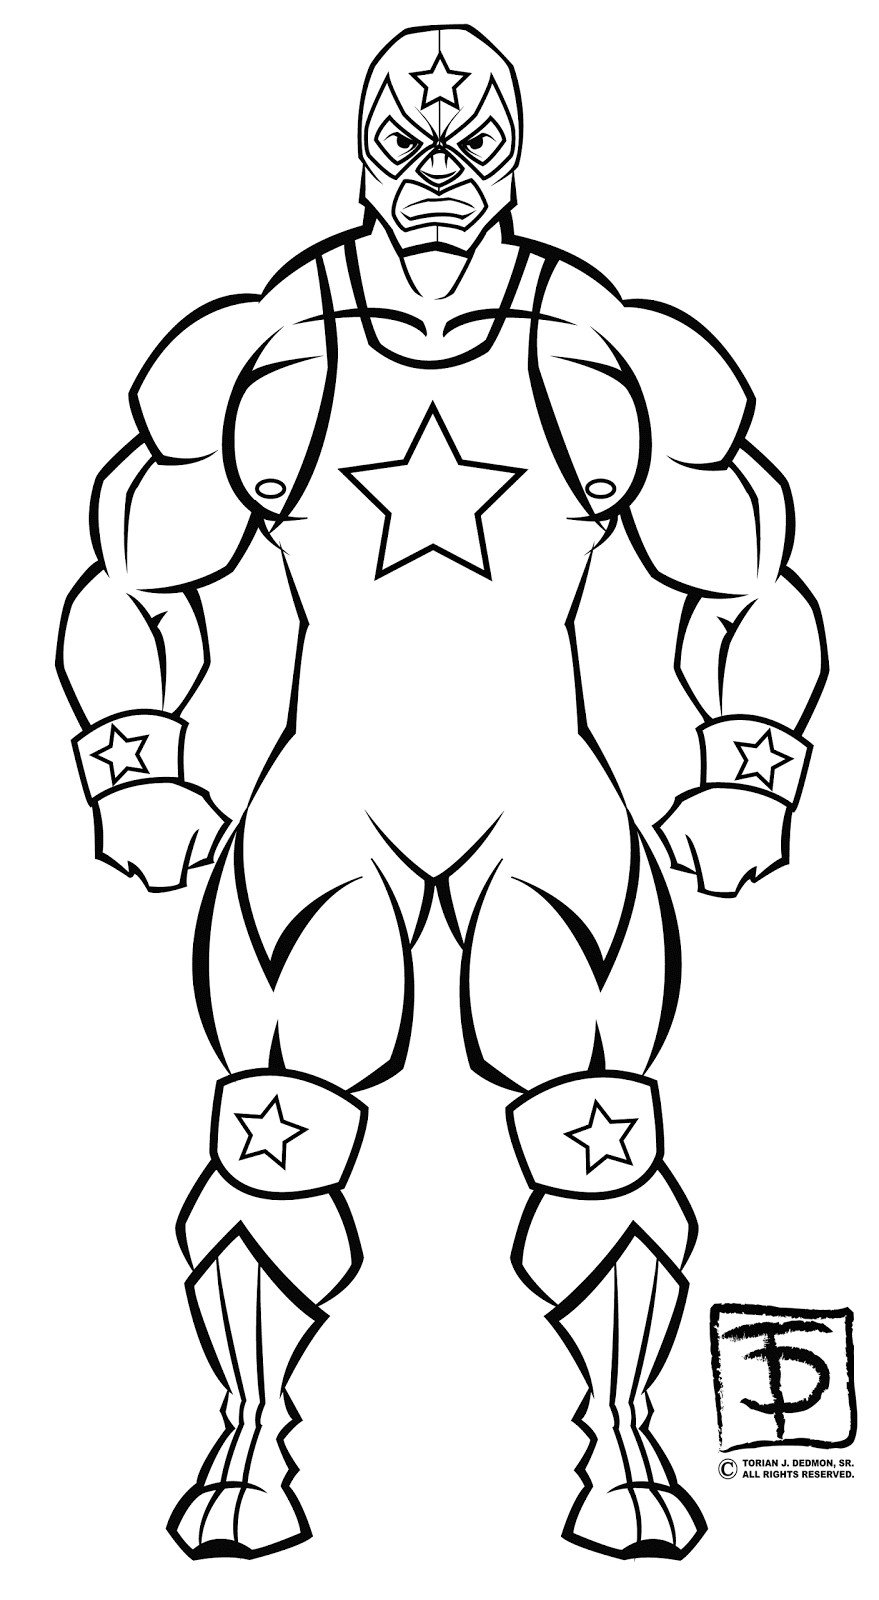 Wwe Coloring Pages Printable
 WWE Coloring Pages of Rey Mysterio